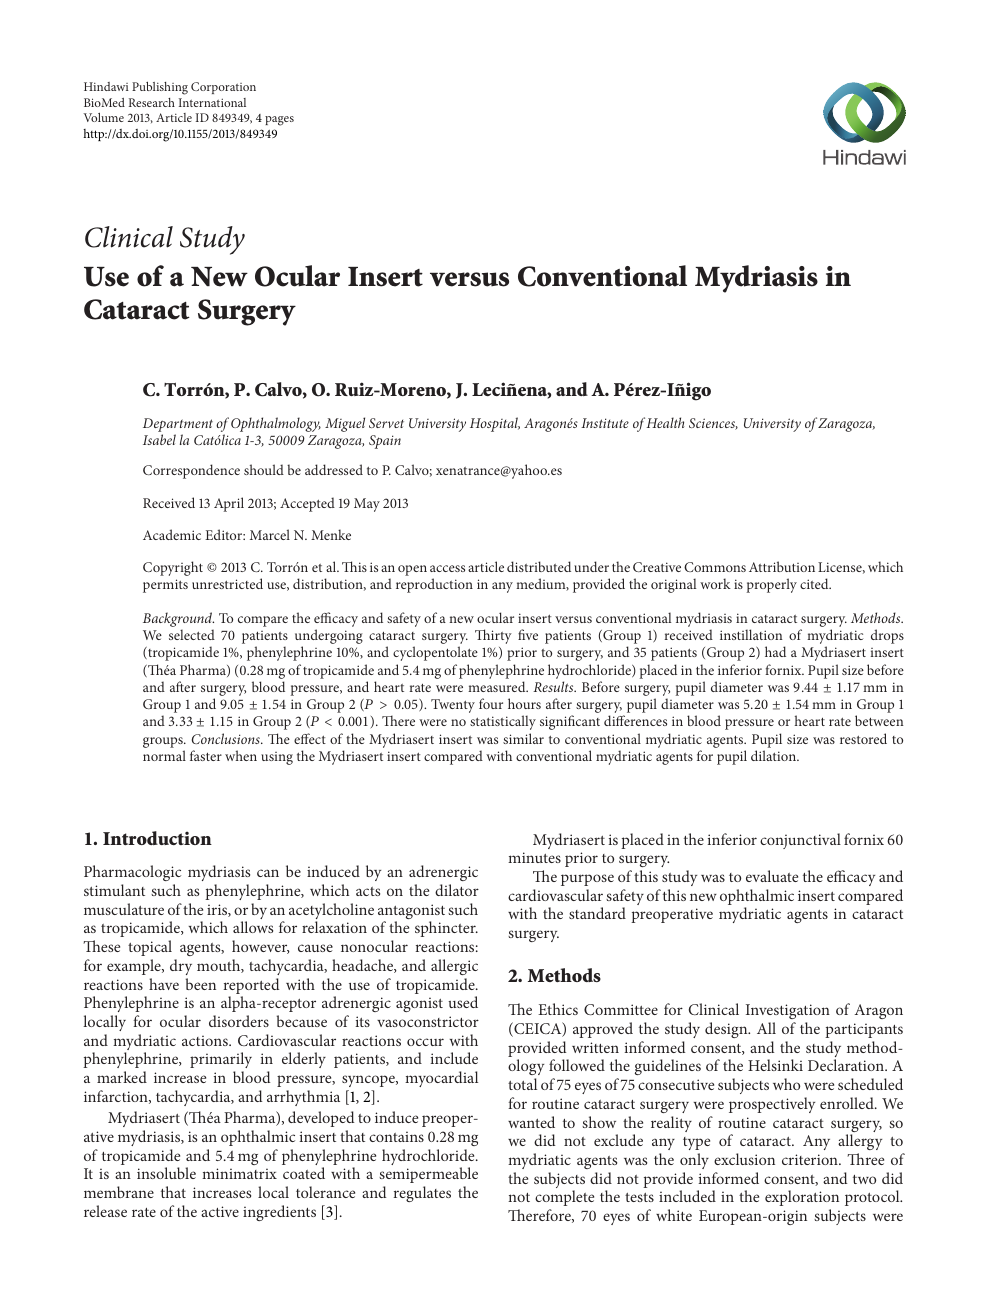 Use Of A New Ocular Insert Versus Conventional Mydriasis In Cataract Surgery Topic Of Research Paper In Clinical Medicine Download Scholarly Article Pdf And Read For Free On Cyberleninka Open Science